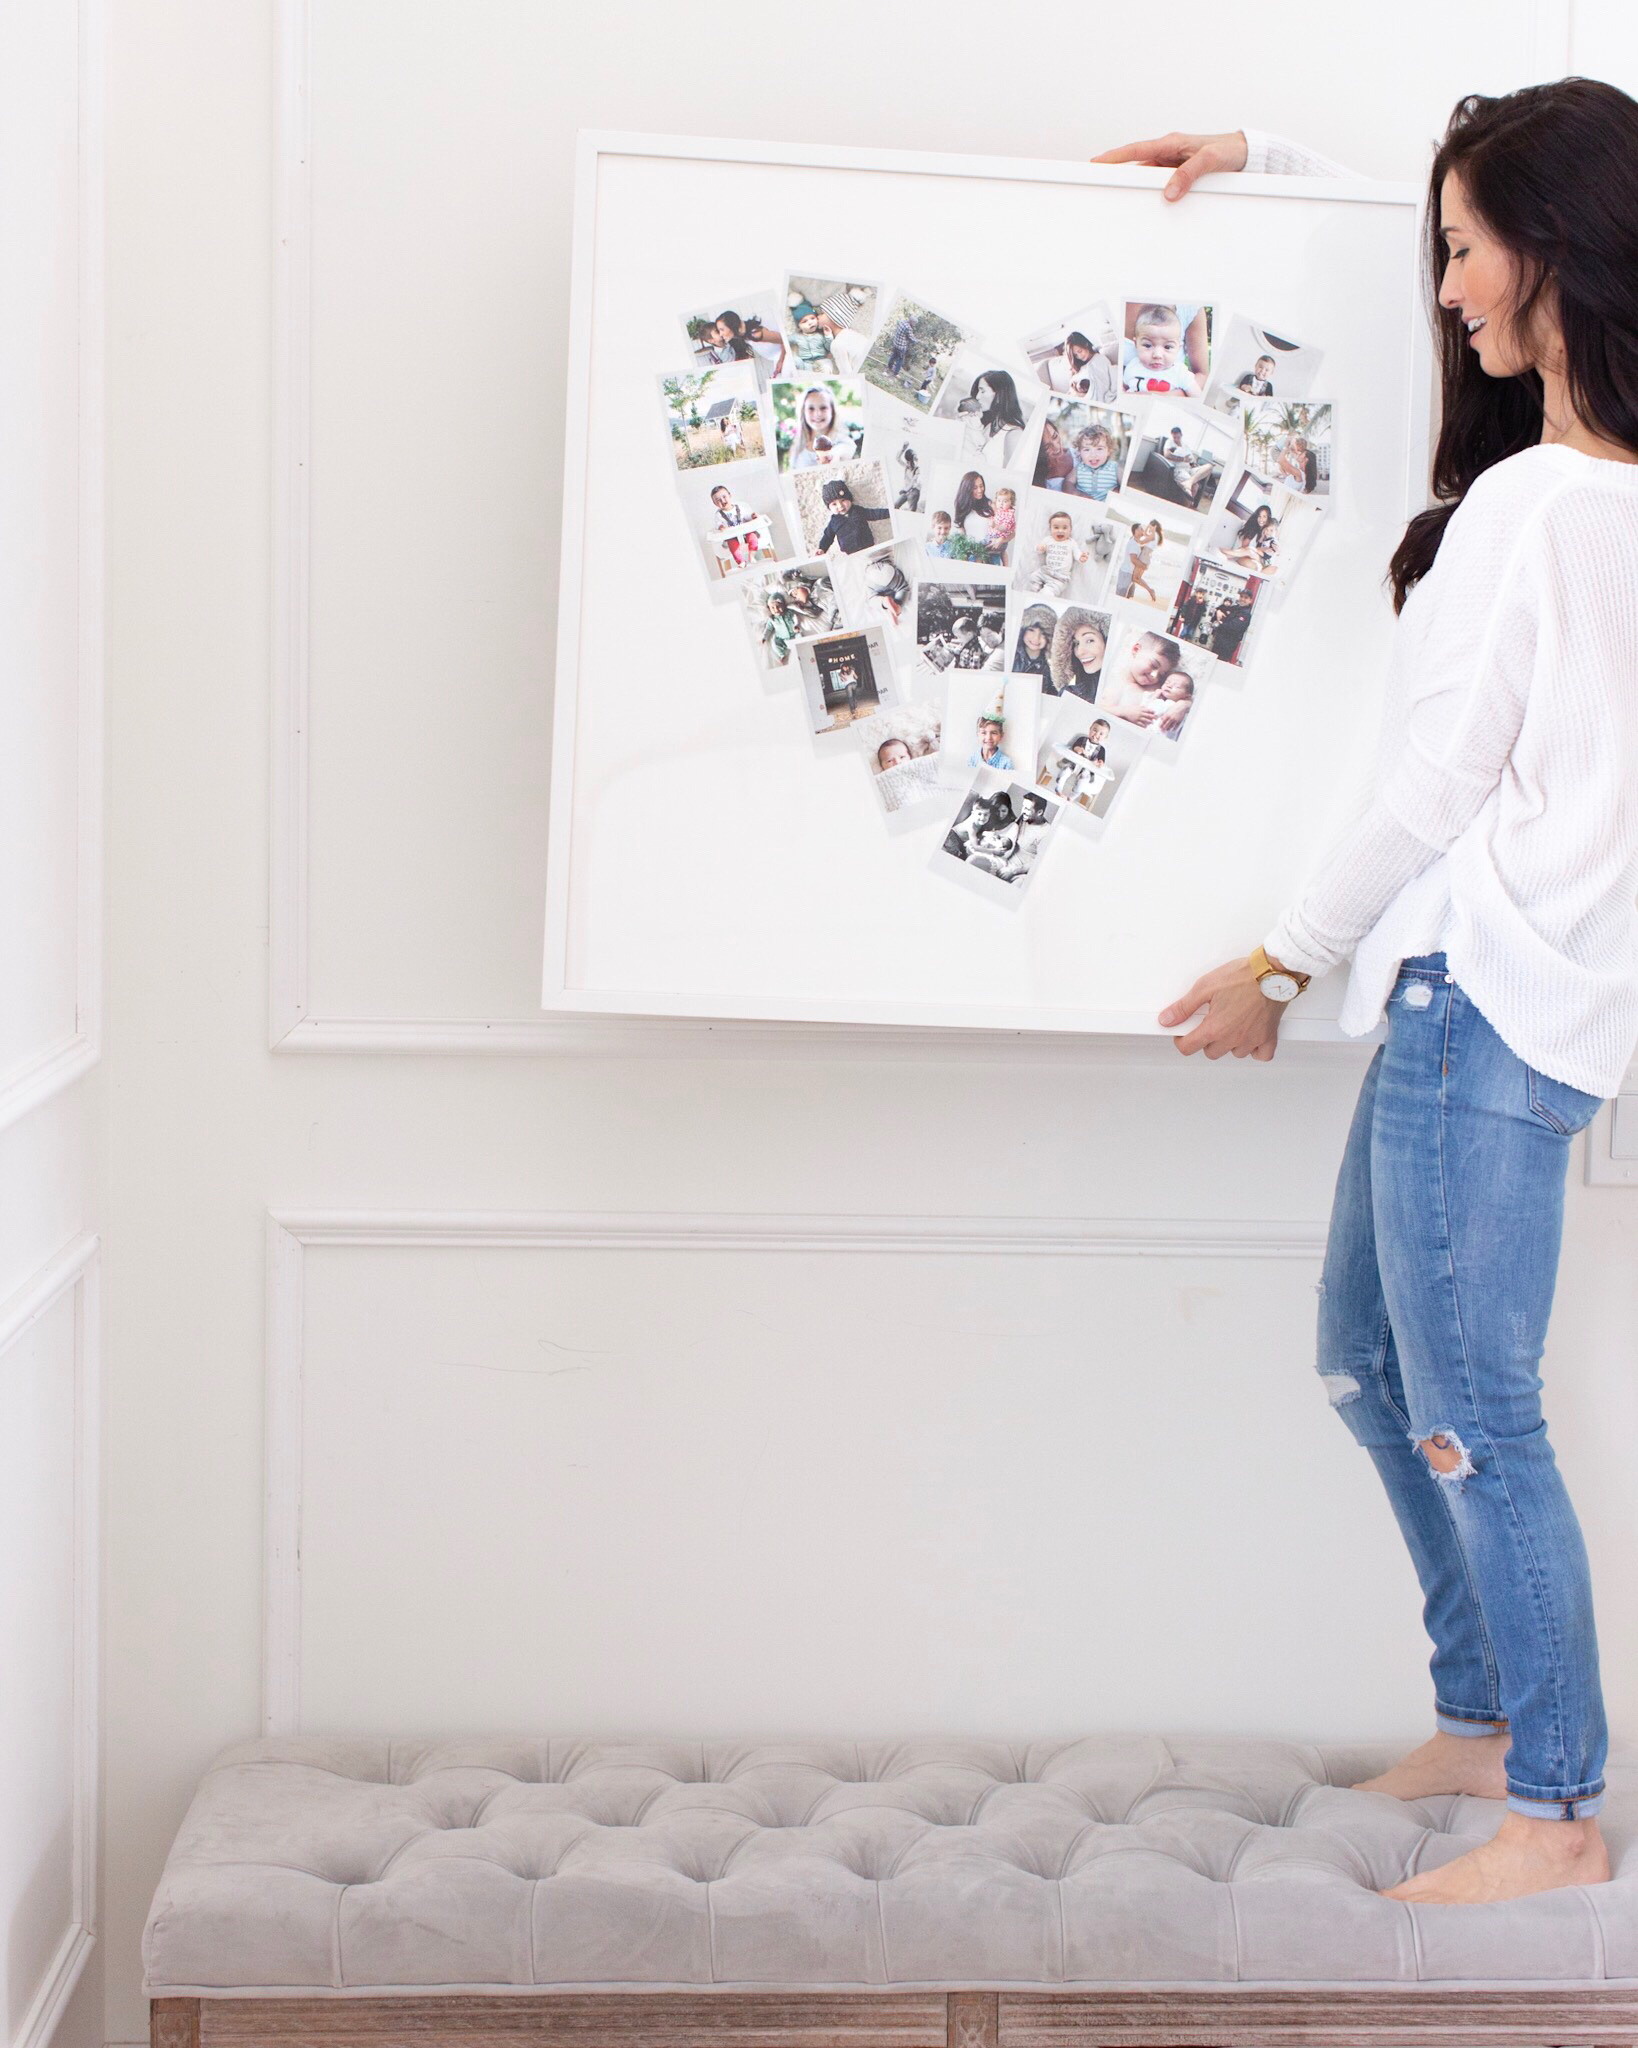 Heartwarming personalized heart collage